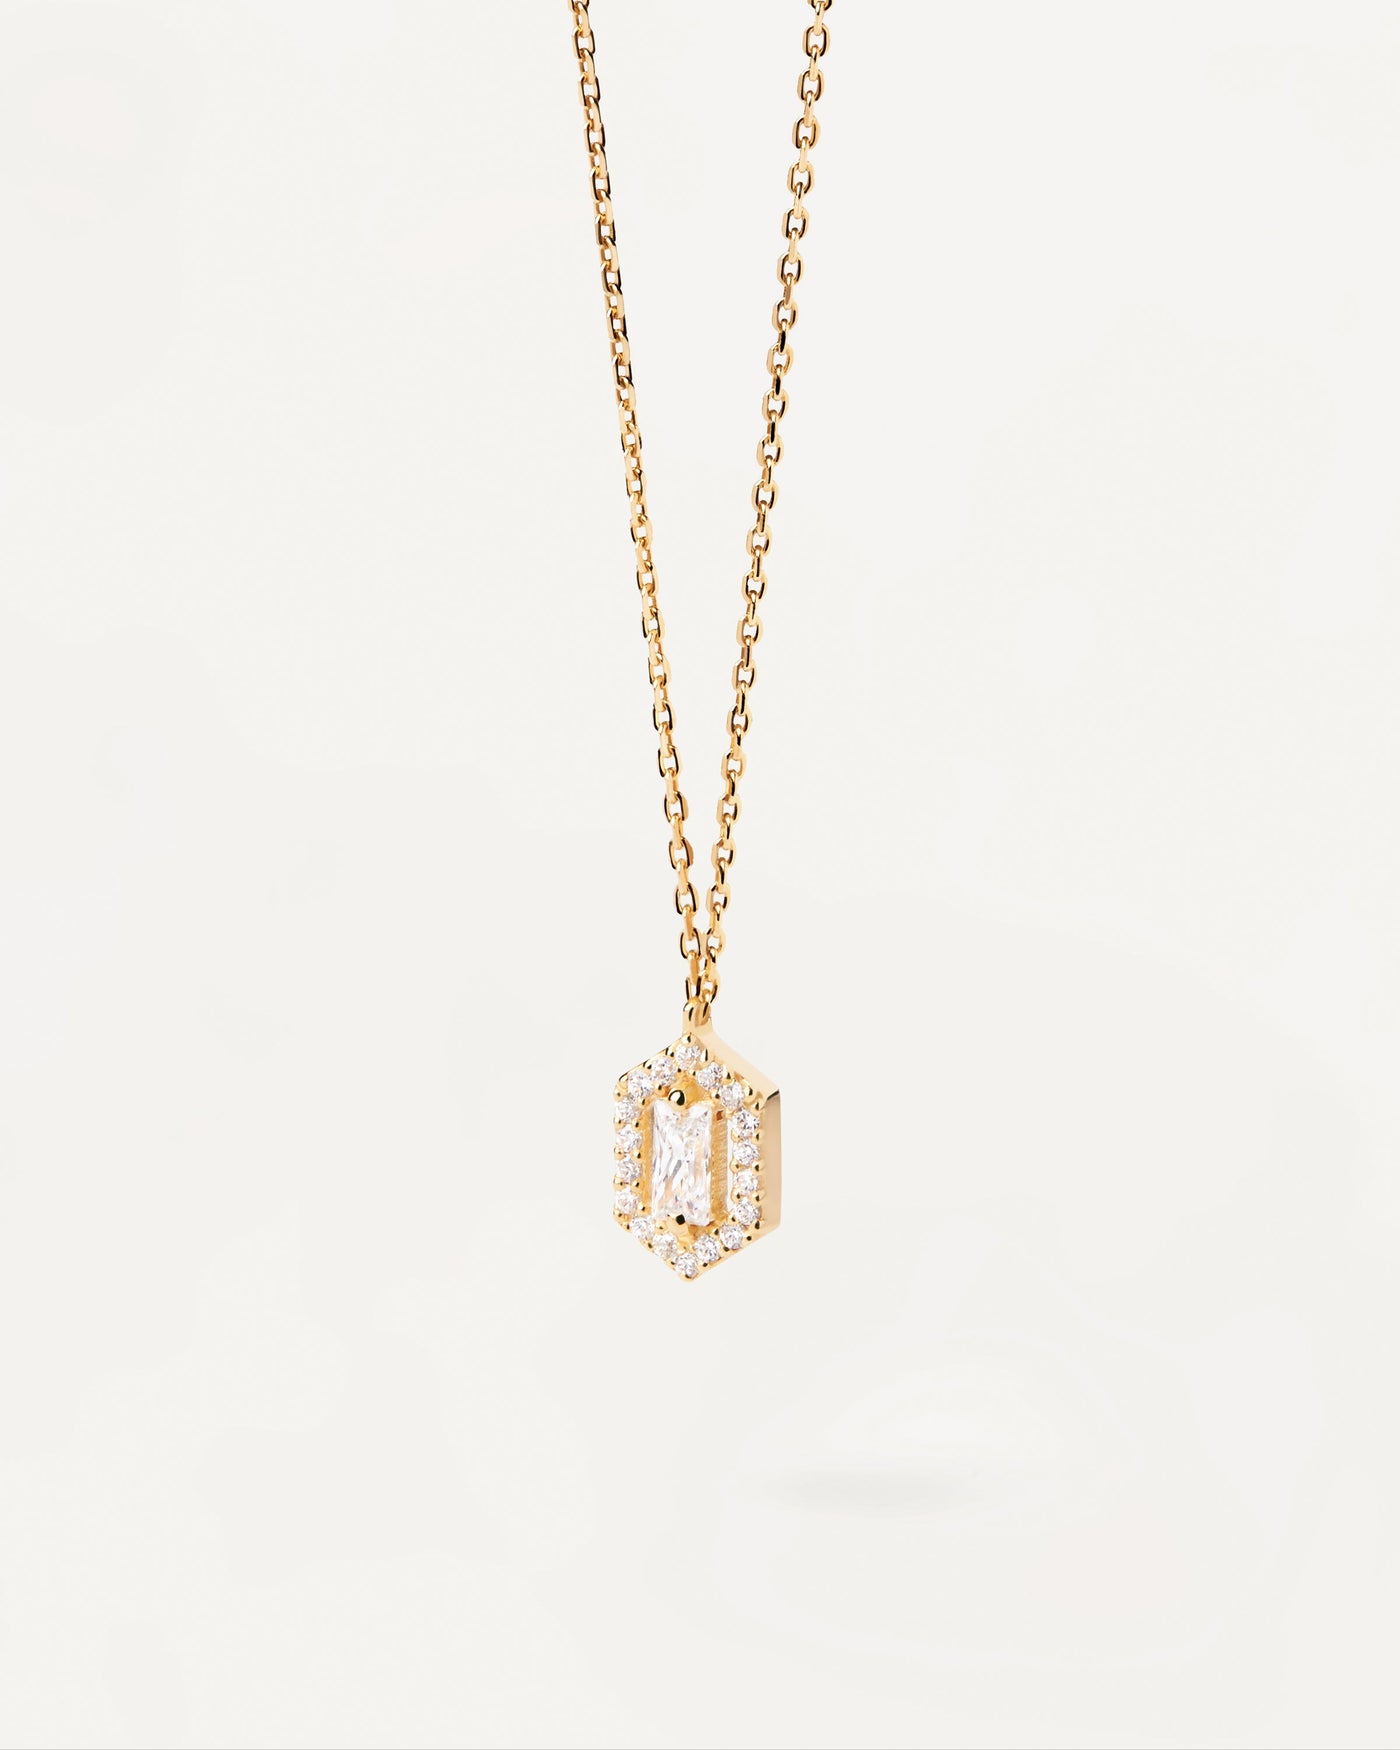 2023 Selection | Sentiment Necklace. Gold-plated necklace with hexagon shape pendant with white zirconia. Get the latest arrival from PDPAOLA. Place your order safely and get this Best Seller. Free Shipping.